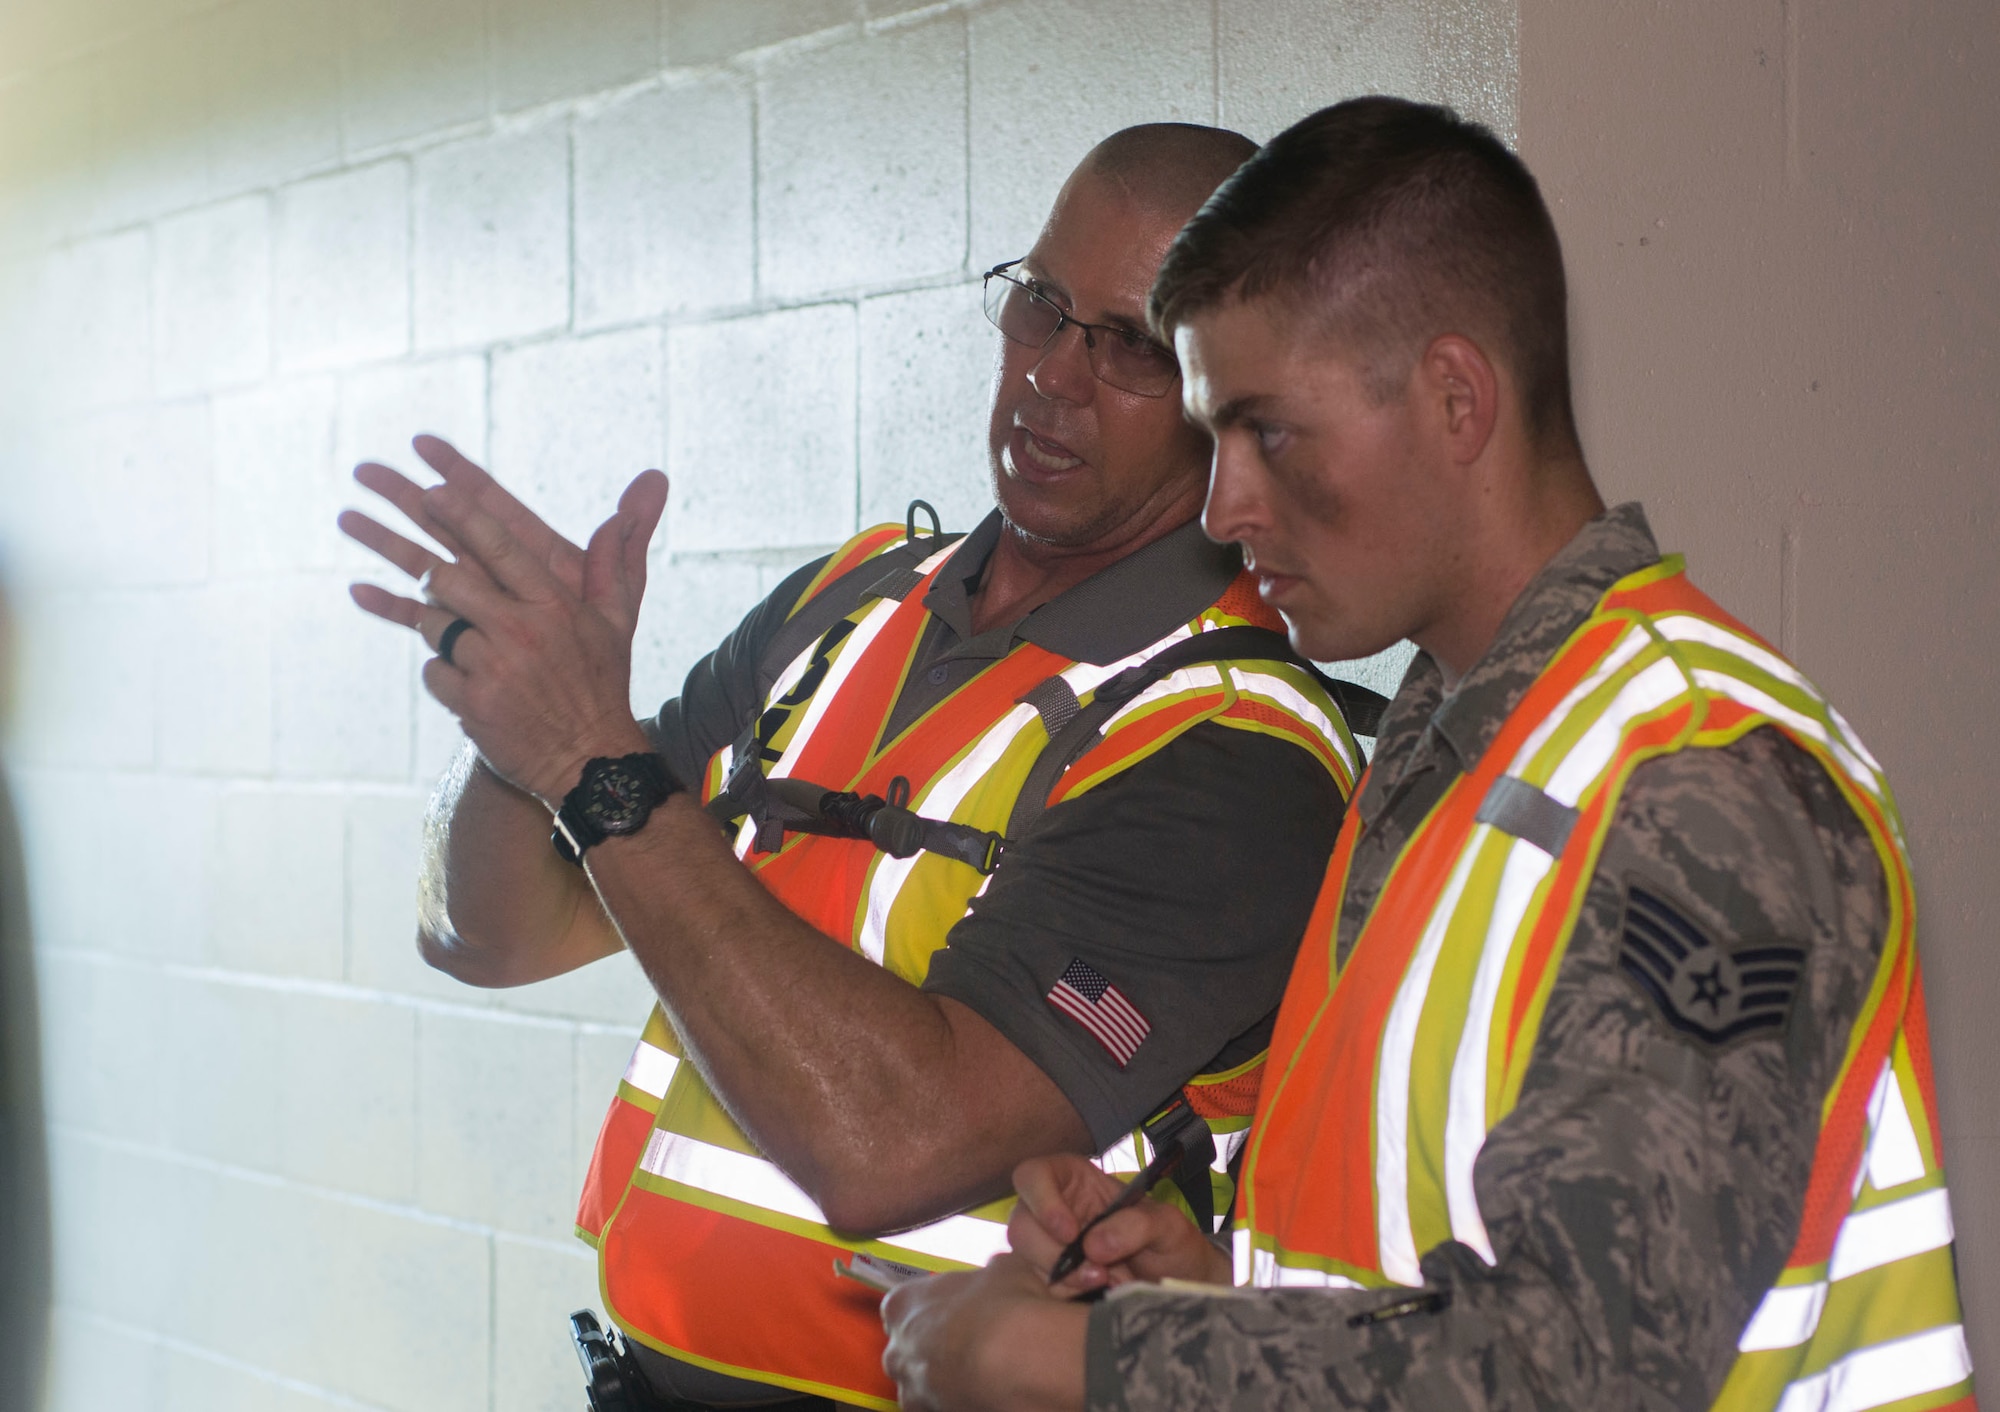 Evaluators from the 6th Security Forces Squadron talk about how teams performed and take notes during an active shooter exercise at MacDill Air Force Base, Fla., Aug. 8, 2019.